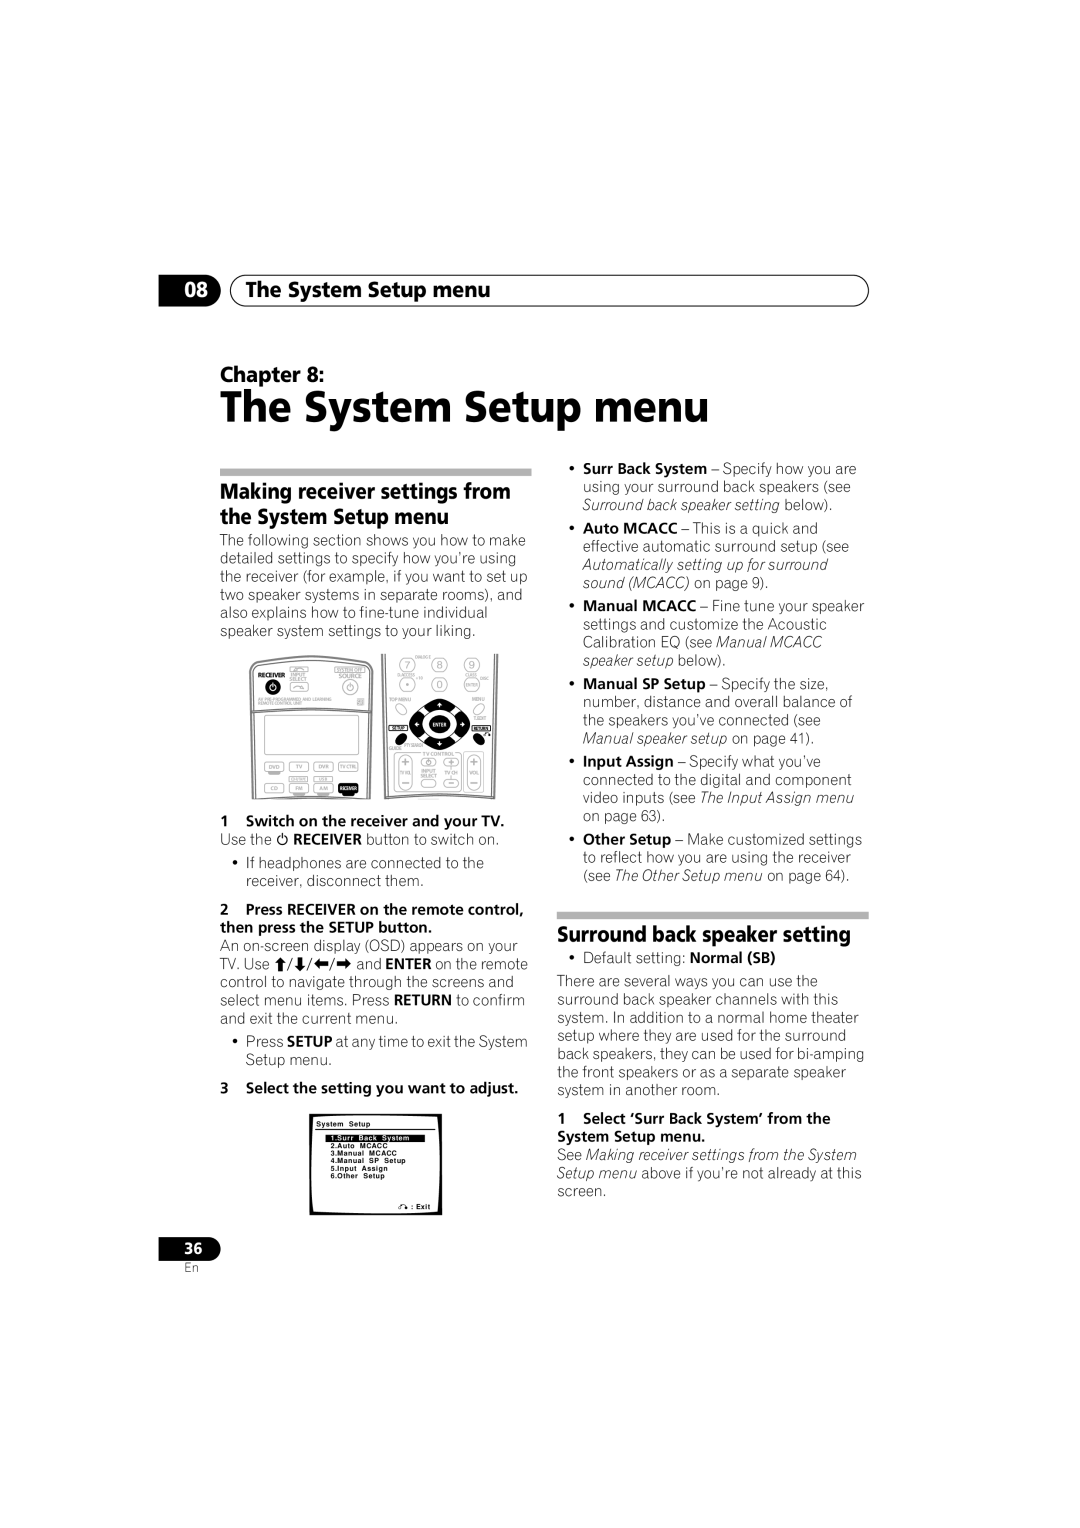 Pioneer VSX-916-S 08The System Setup menu Chapter, Surround back speaker setting below, sound MCACC on page 